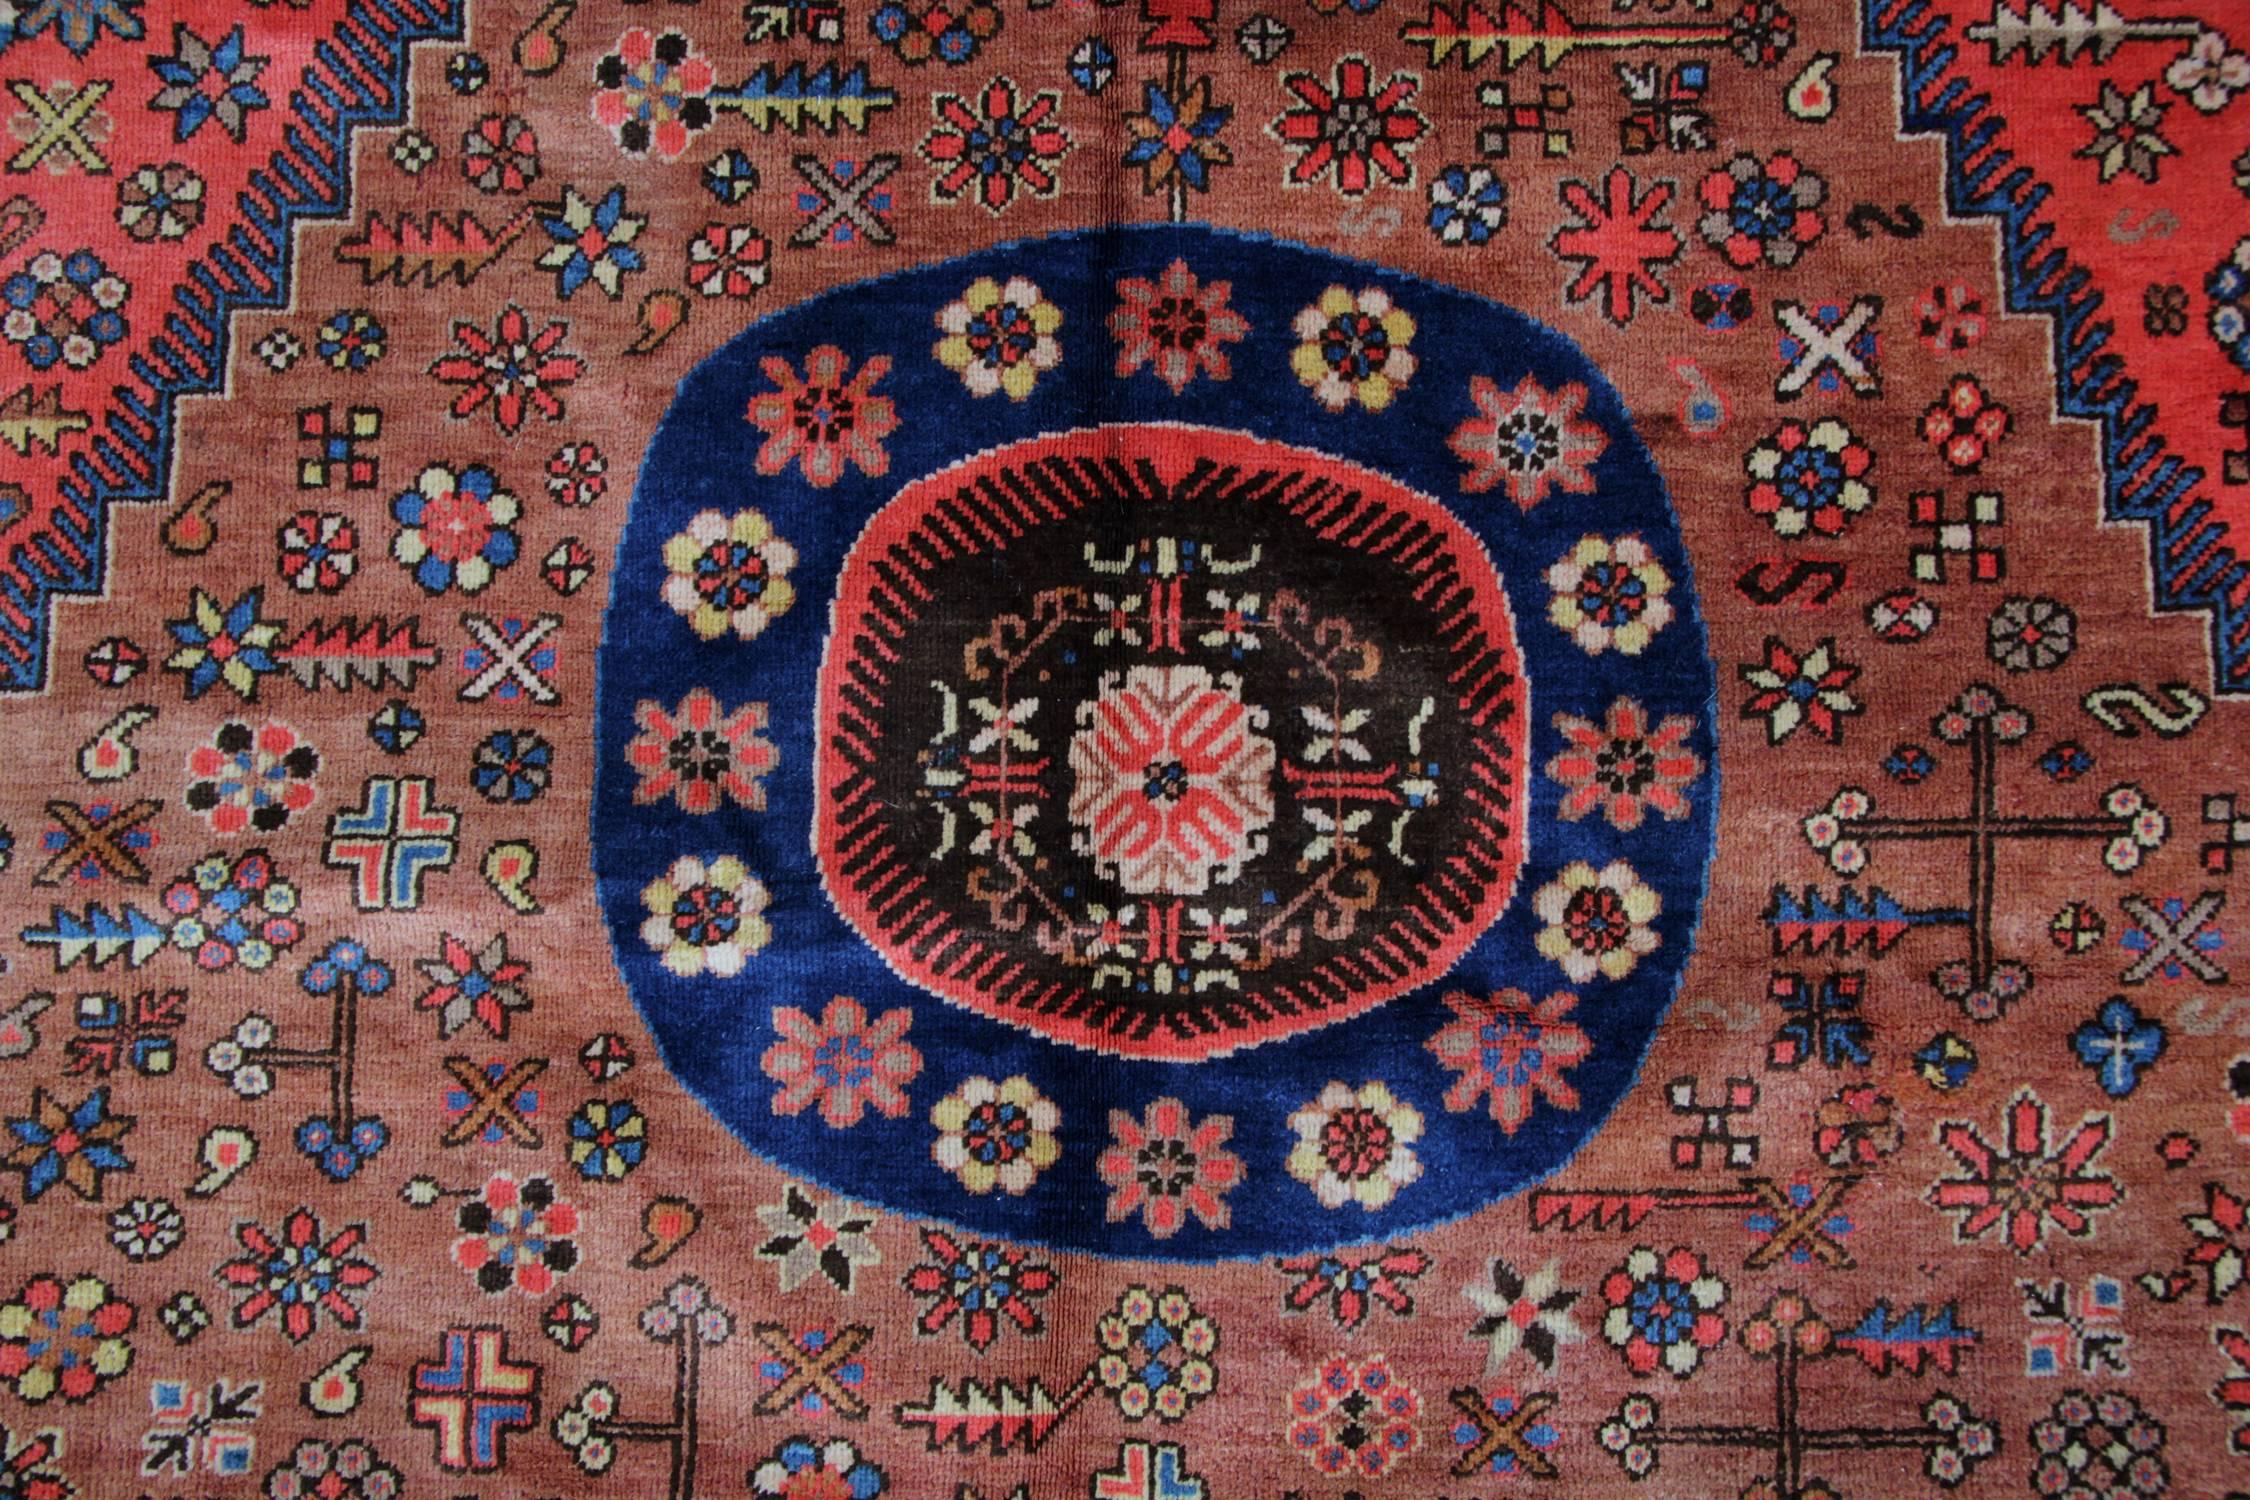 Woven Rare Antique Rugs, Oriental Rugs Traditional Red Handmade Carpet from Khotan